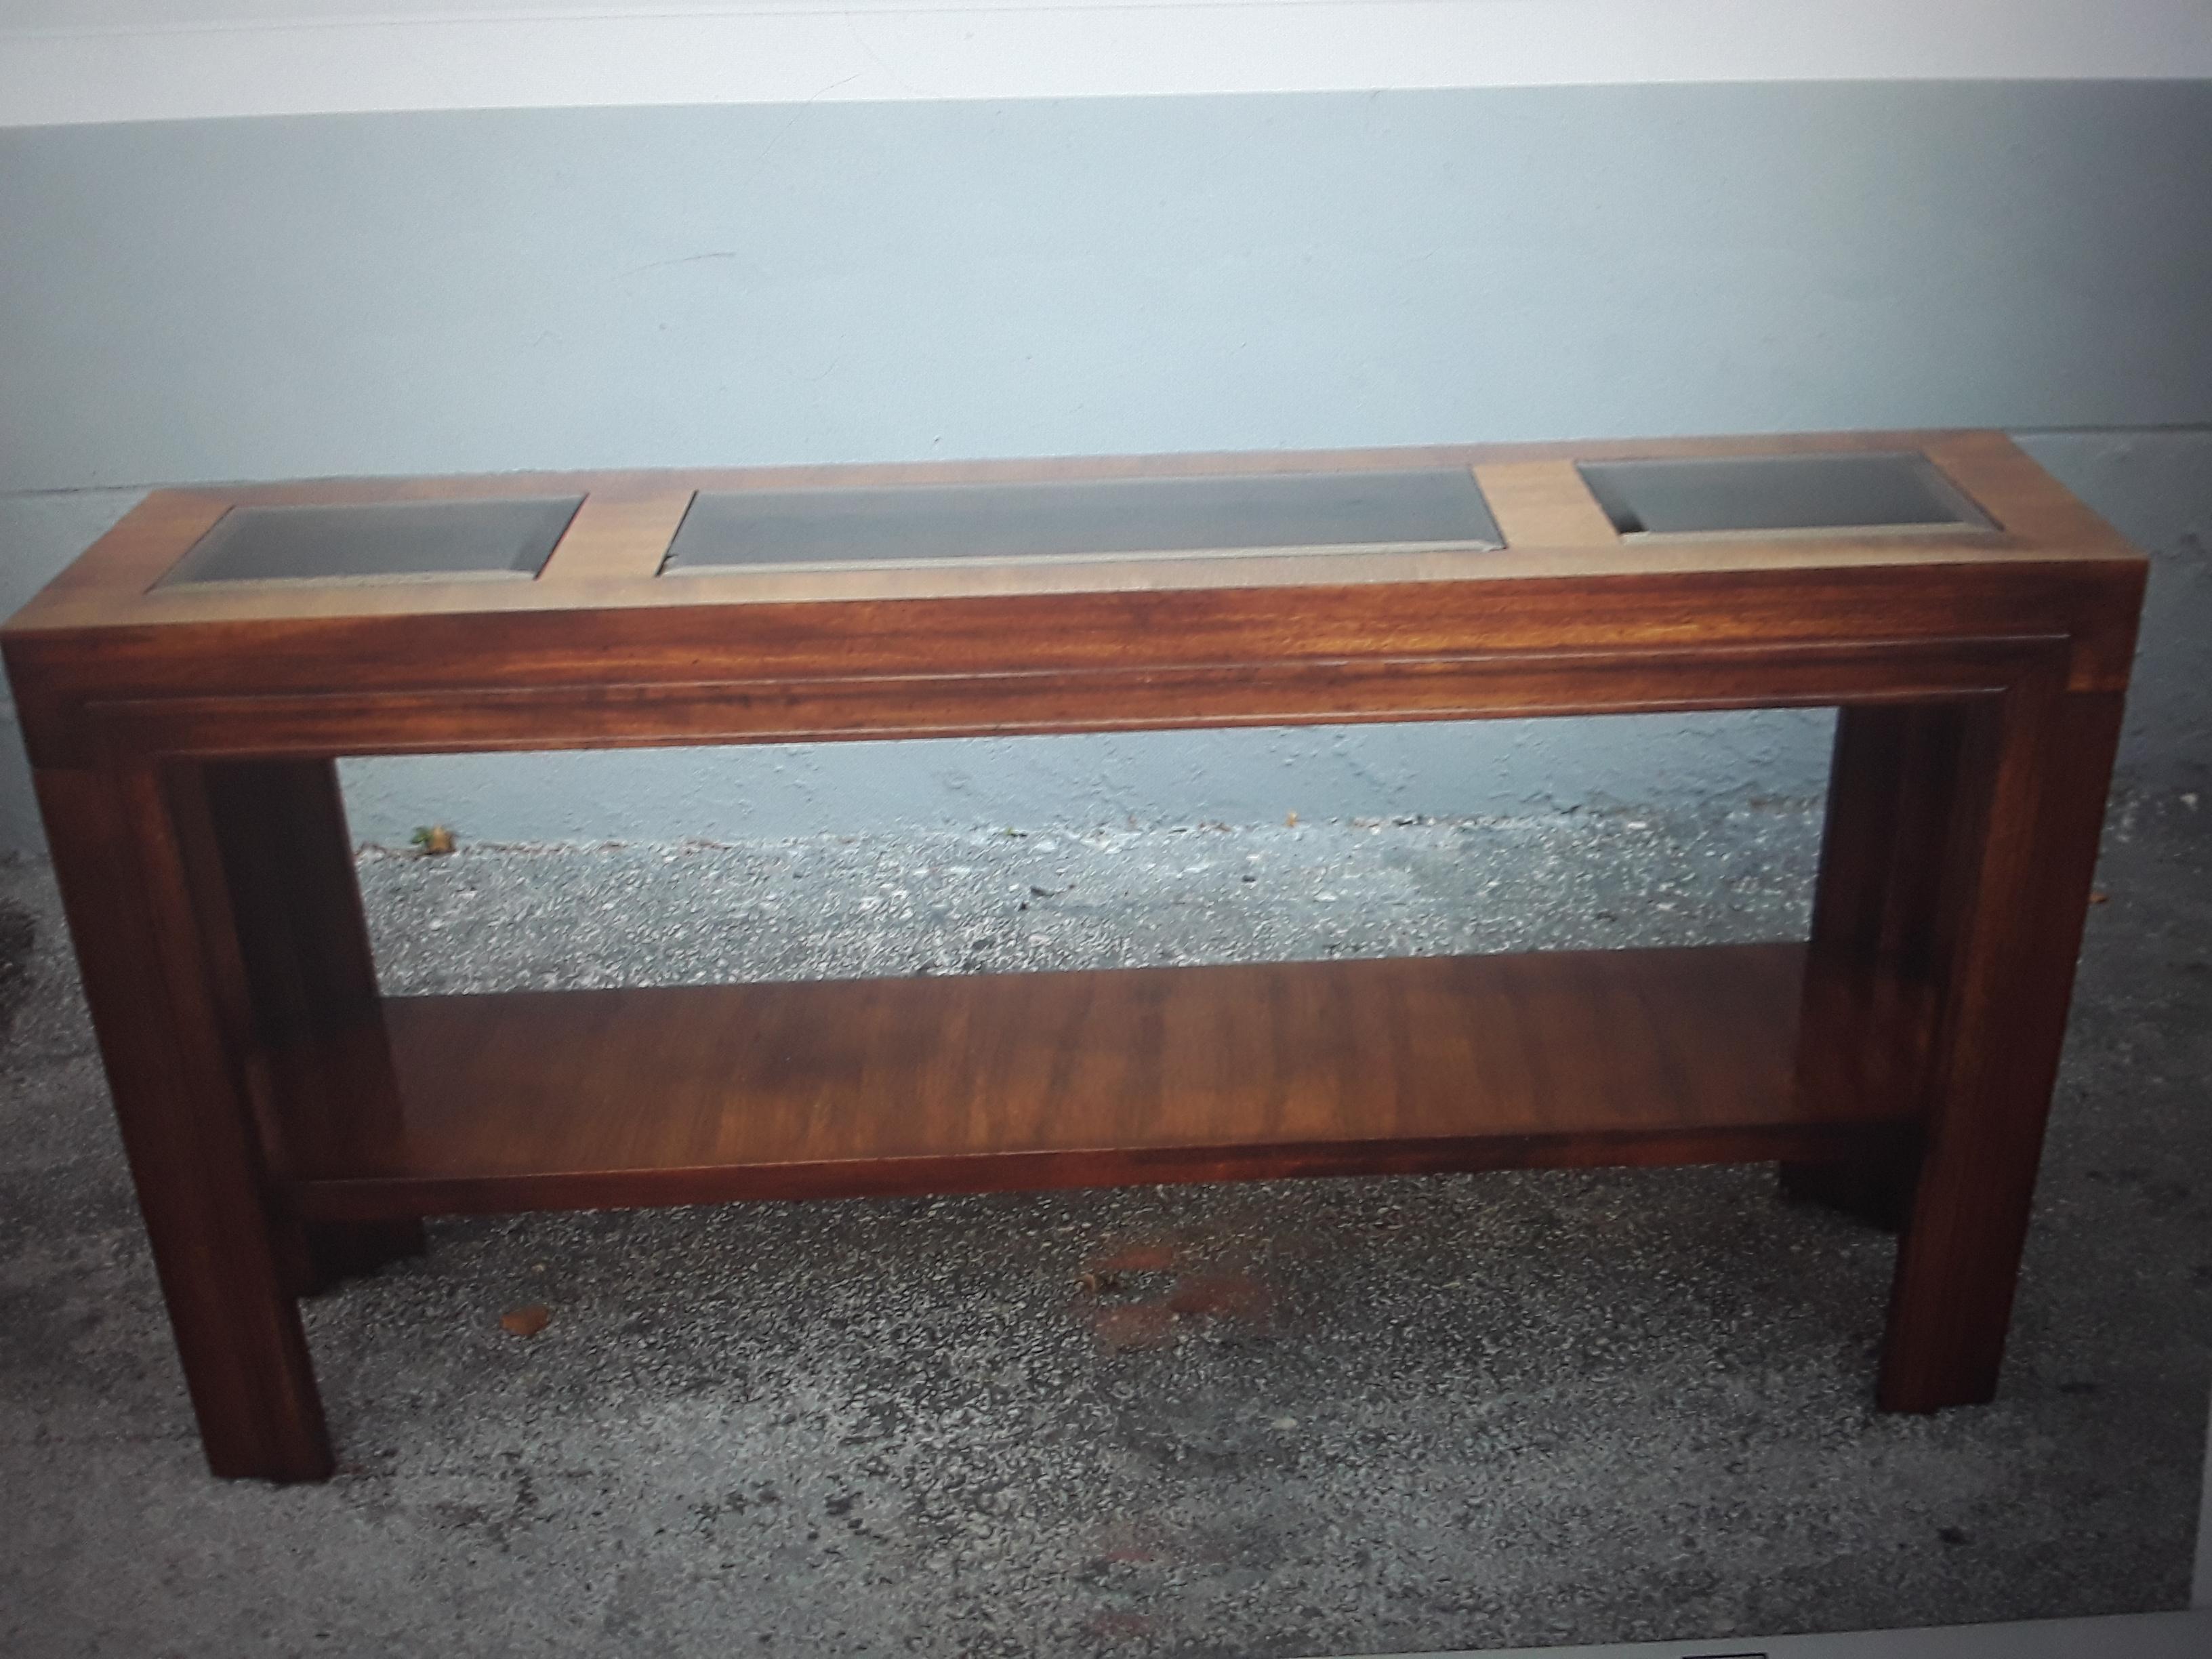 1960's Mid Century Modern Carved Walnut with Glass Insert Console Table/ Sofa Table. This console would work well as a behind the sofa table as well as a standard console table.